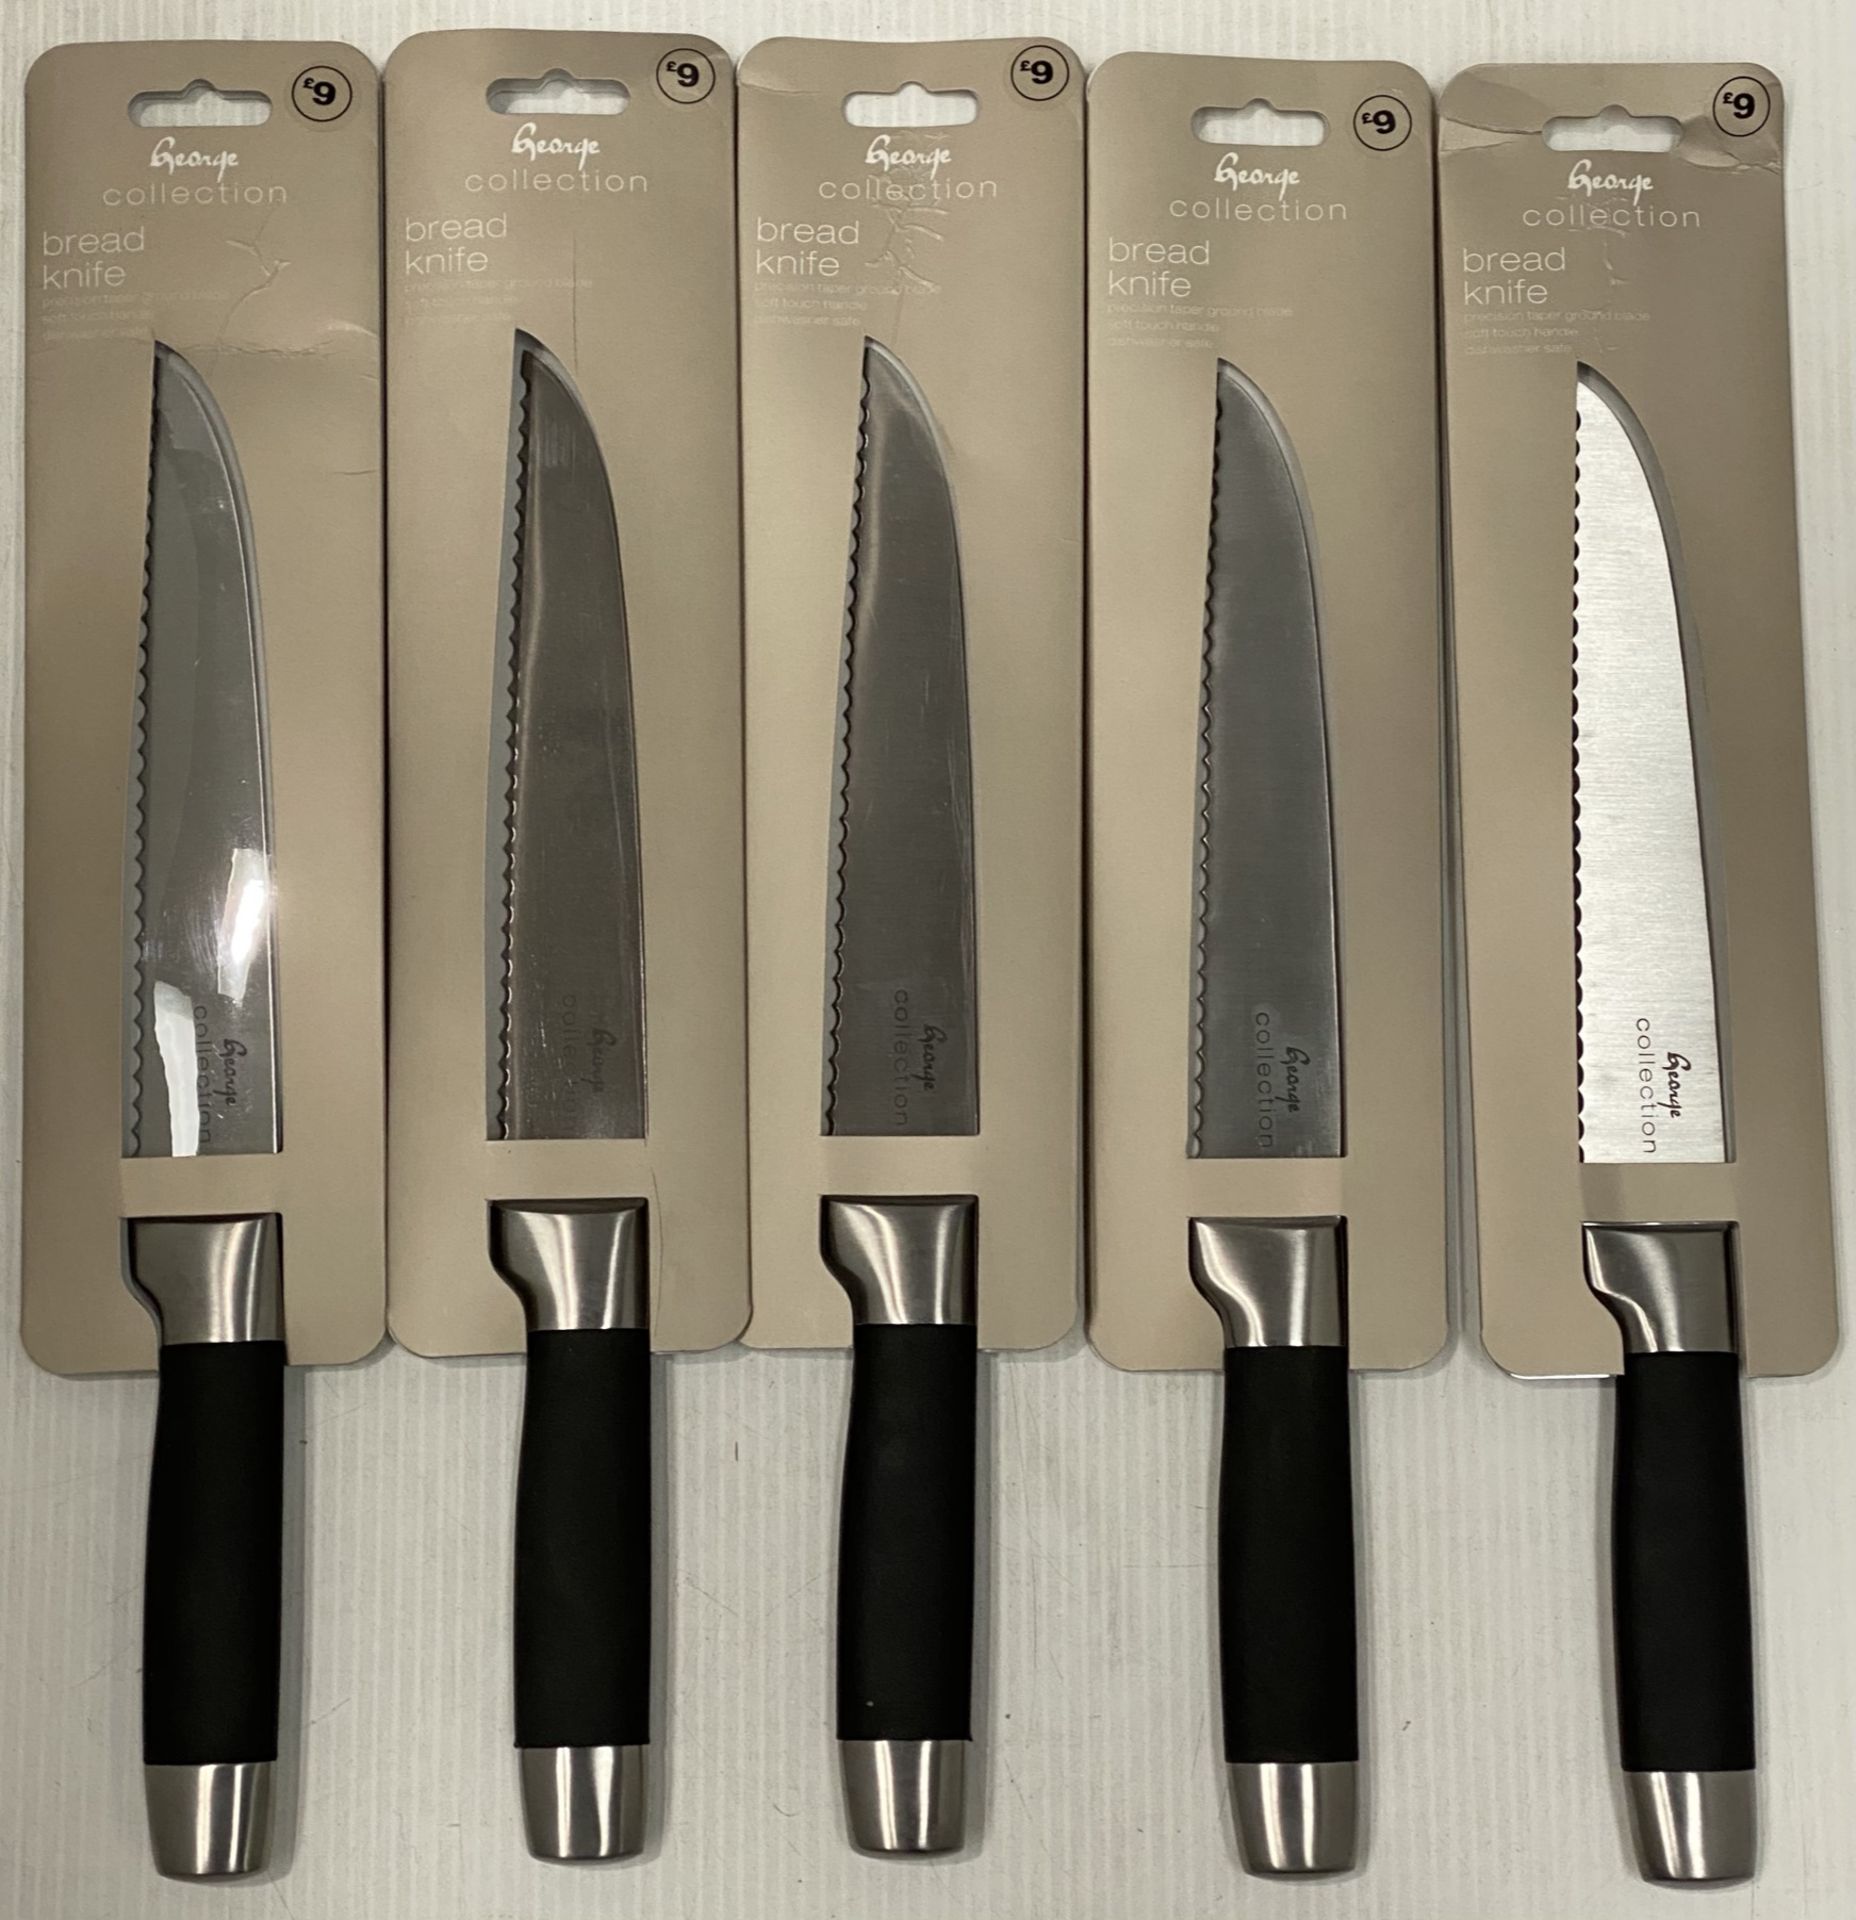 50 x Asda George Collection Bread Knives